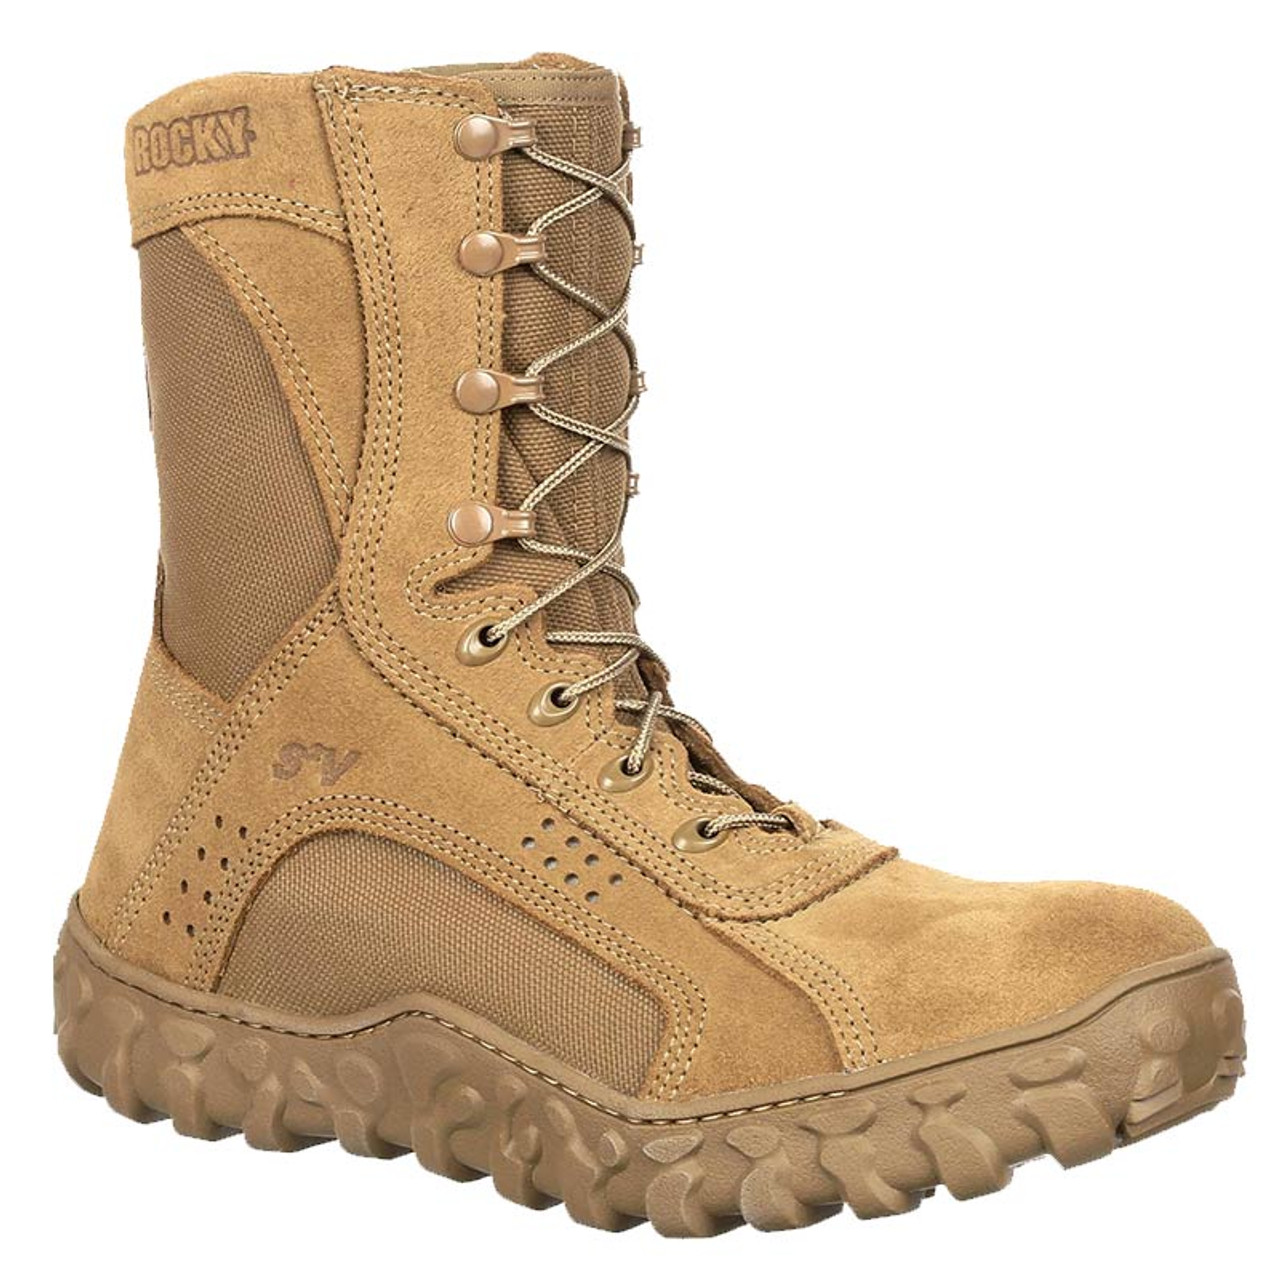  Men's Military Tactical Boots 8 Steel Toe Work Safety Boots  with Side Zipper Lightweight Army Combat Boots : Clothing, Shoes & Jewelry